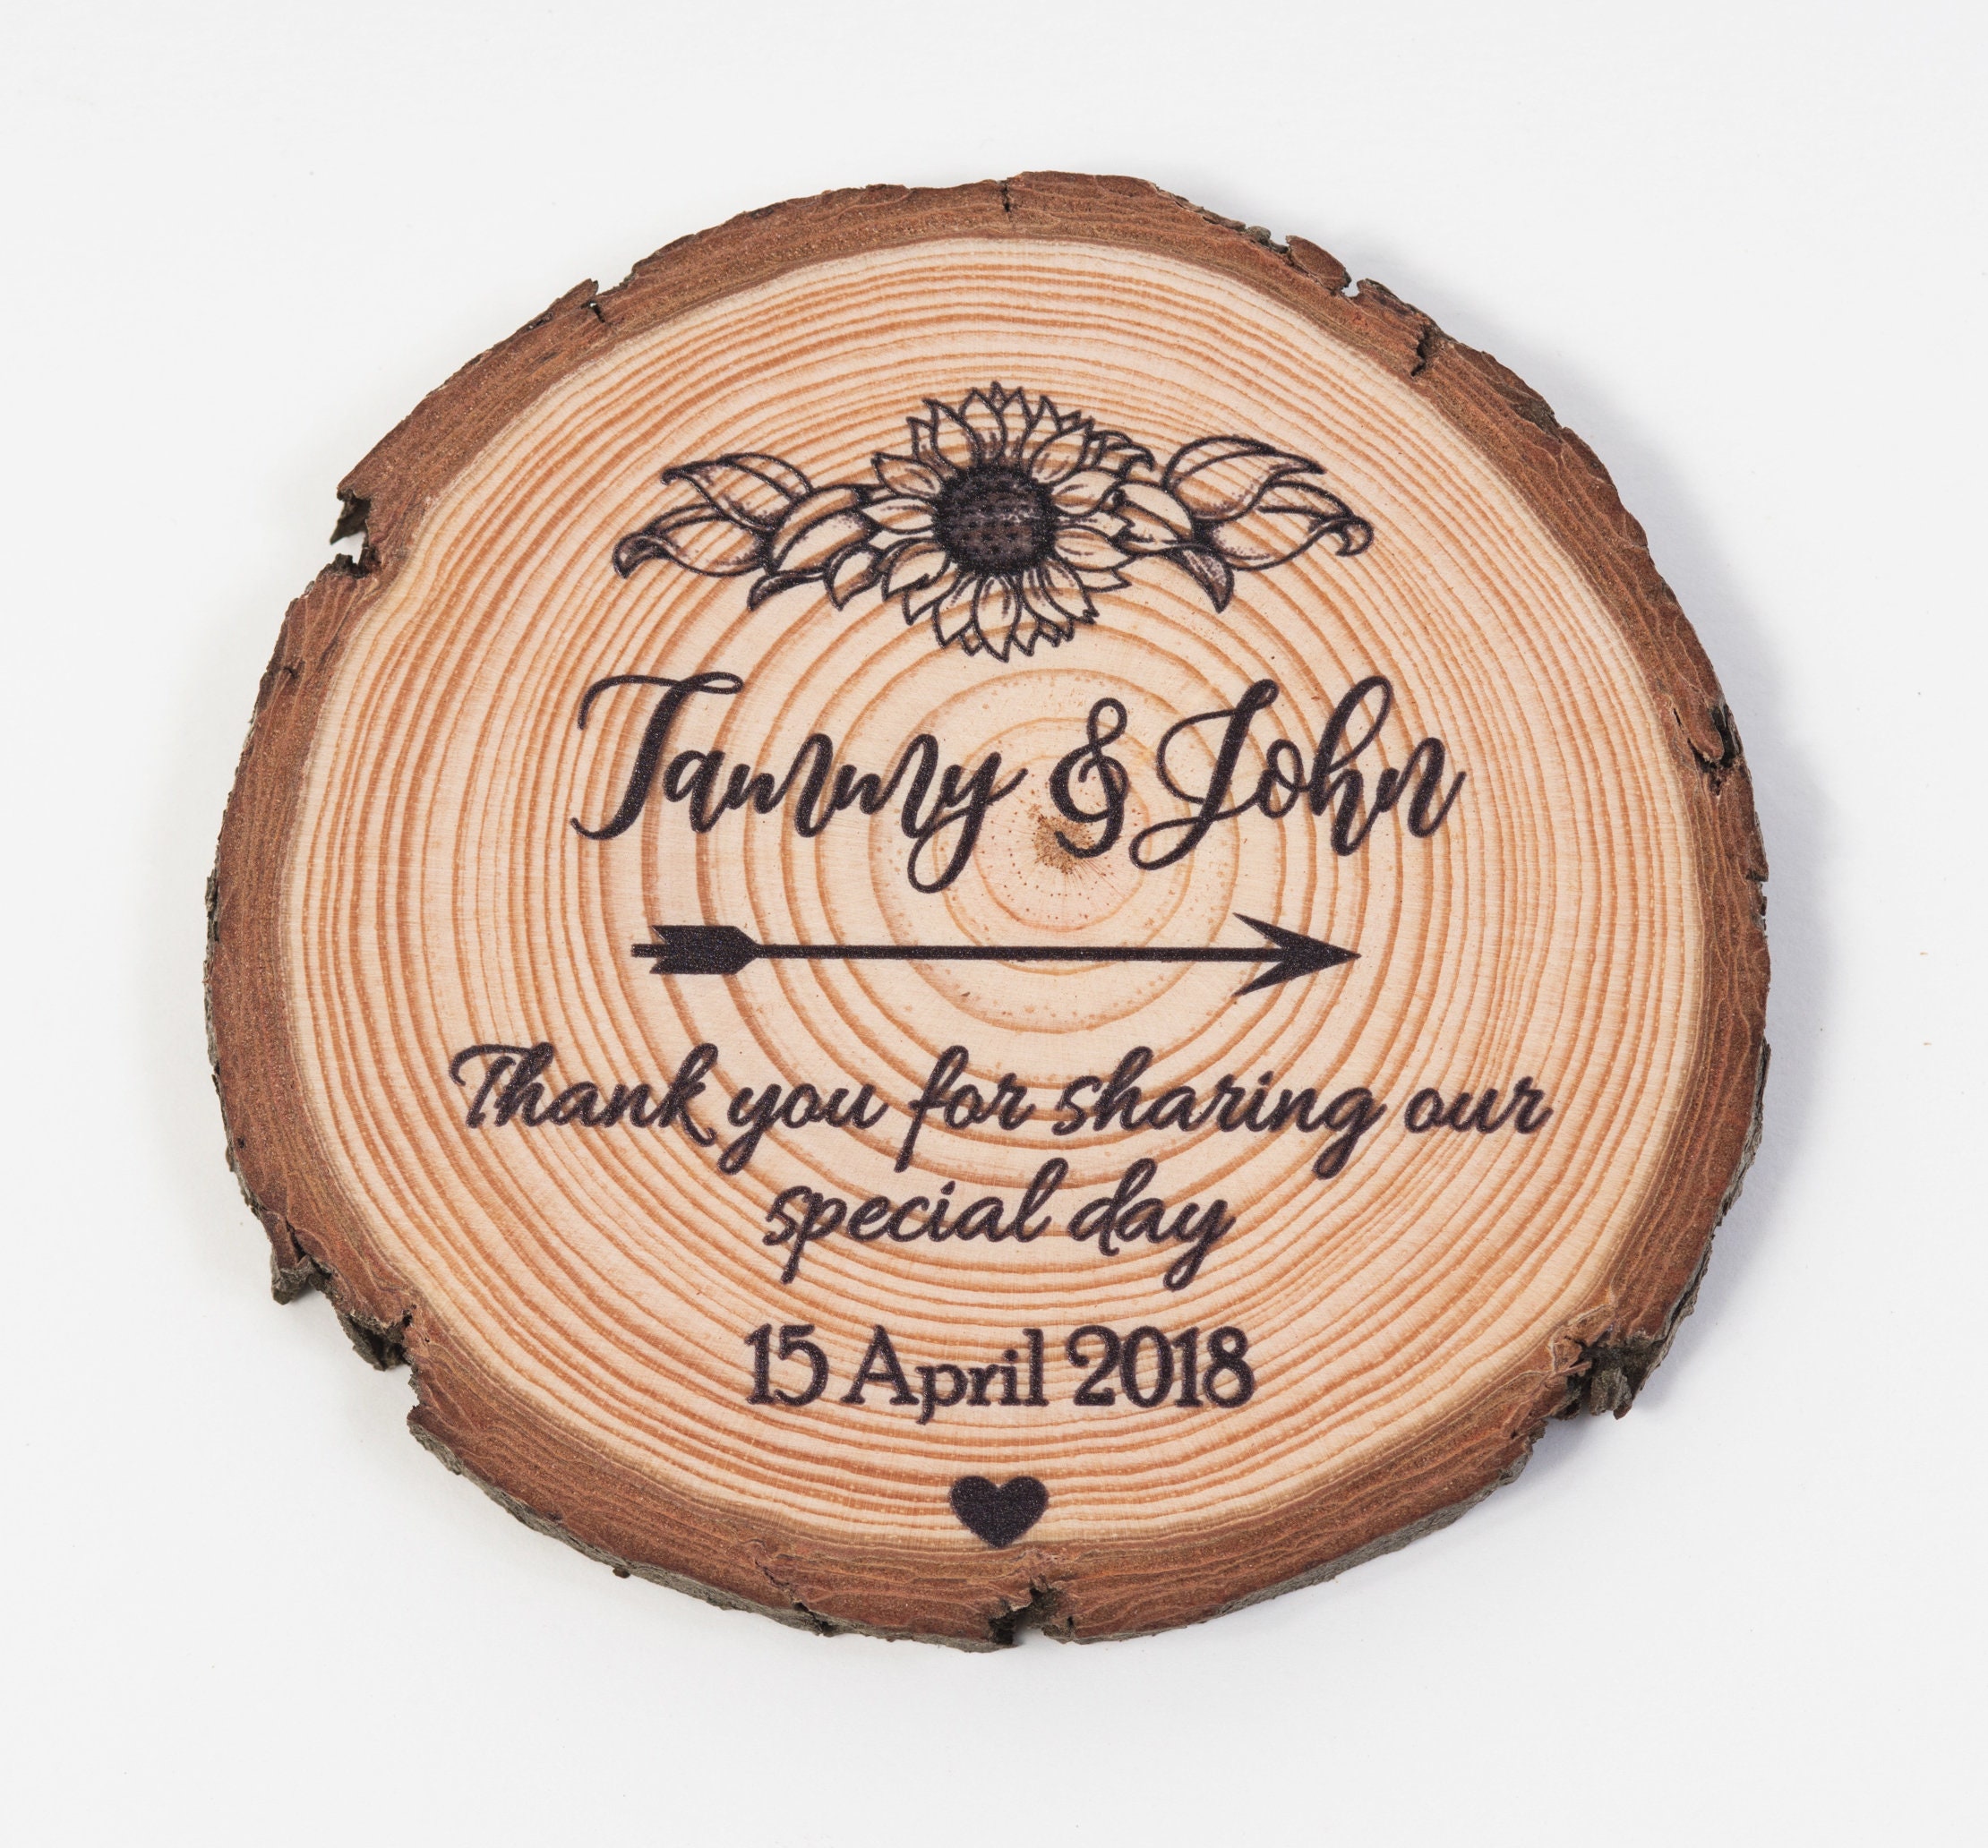 Details And Gifts For Weddings Natural Wood Coasters Set Of 4 Coasters  Presented With Rustic Rope Unique Gifts Practical Novelty - Party Favors -  AliExpress